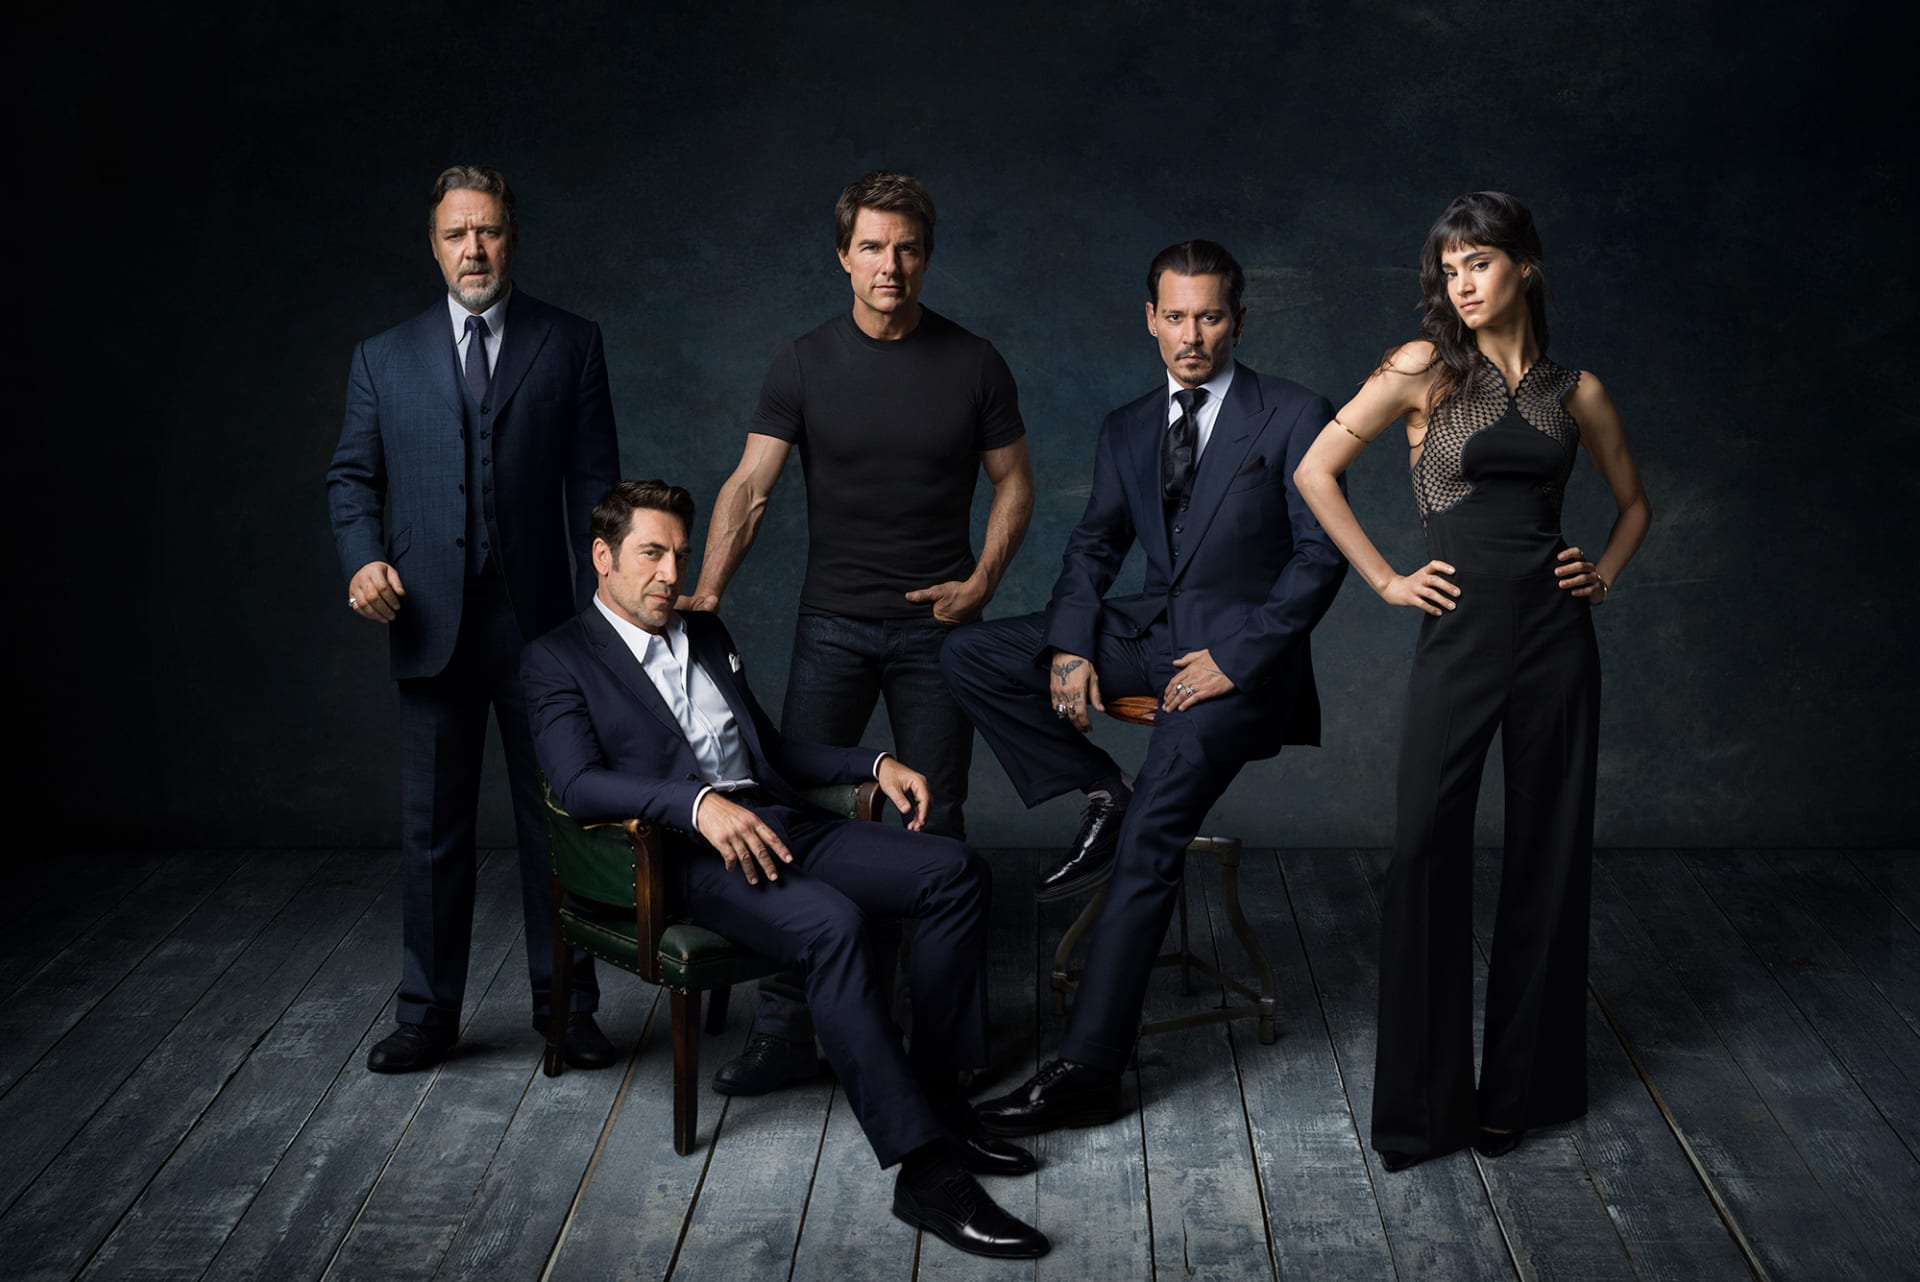 Russell Crowe, Tom Cruise, Johnny Depp, Sofia Boutella a Javier Bardem